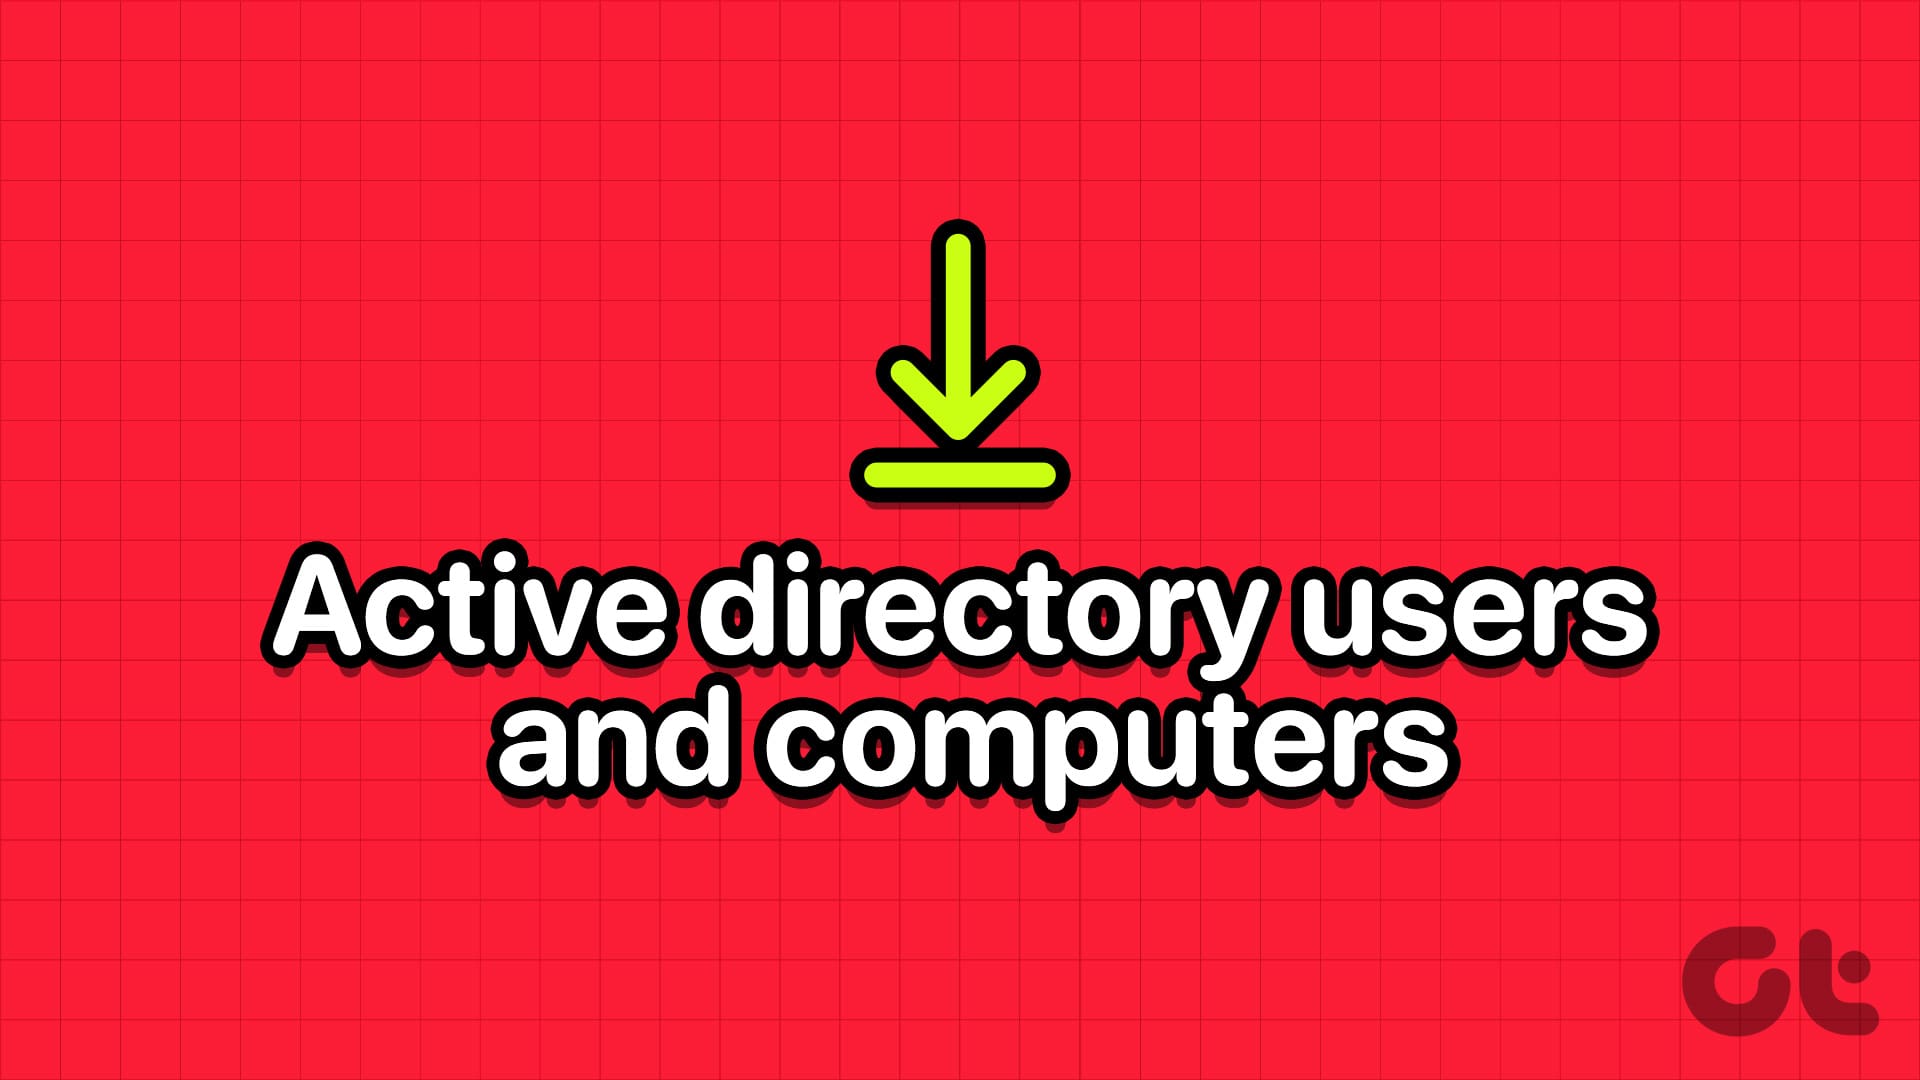 How to Install Active Directory Users and Computers on Windows